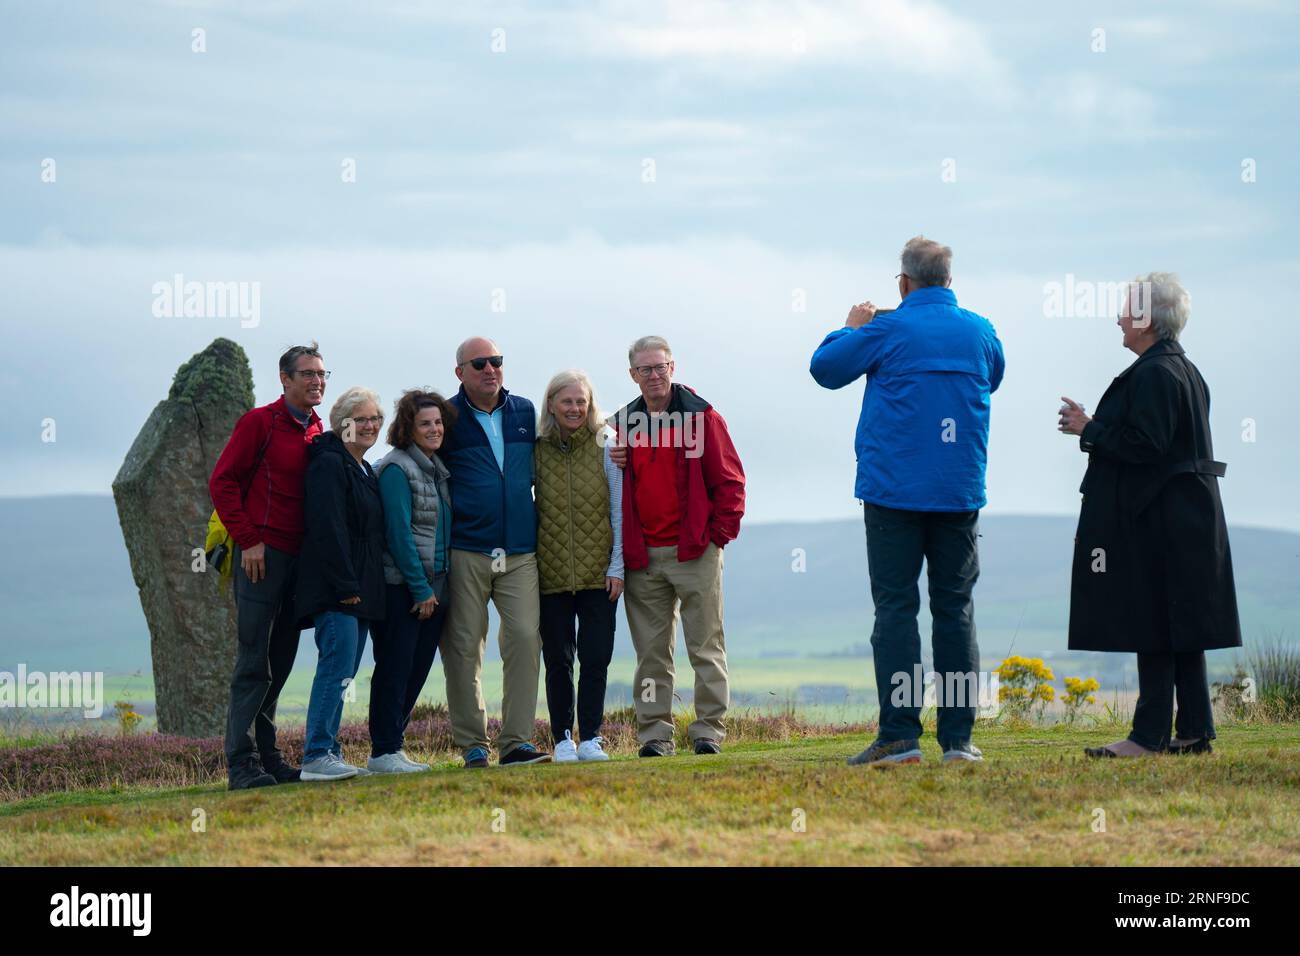 Stromness, Orkney,  Scotland, UK. 1st September 2023. American tourists from visiting cruise ships berthed at Kirkwall visit the Ring of Brodgar neolithic standing stone circle on Orkney. Concerns have been raised by locals that cruise ships are bringing too many tourists to the Islands and current infrastructure cannot cope. Iain Masterton/Alamy Live News Stock Photo